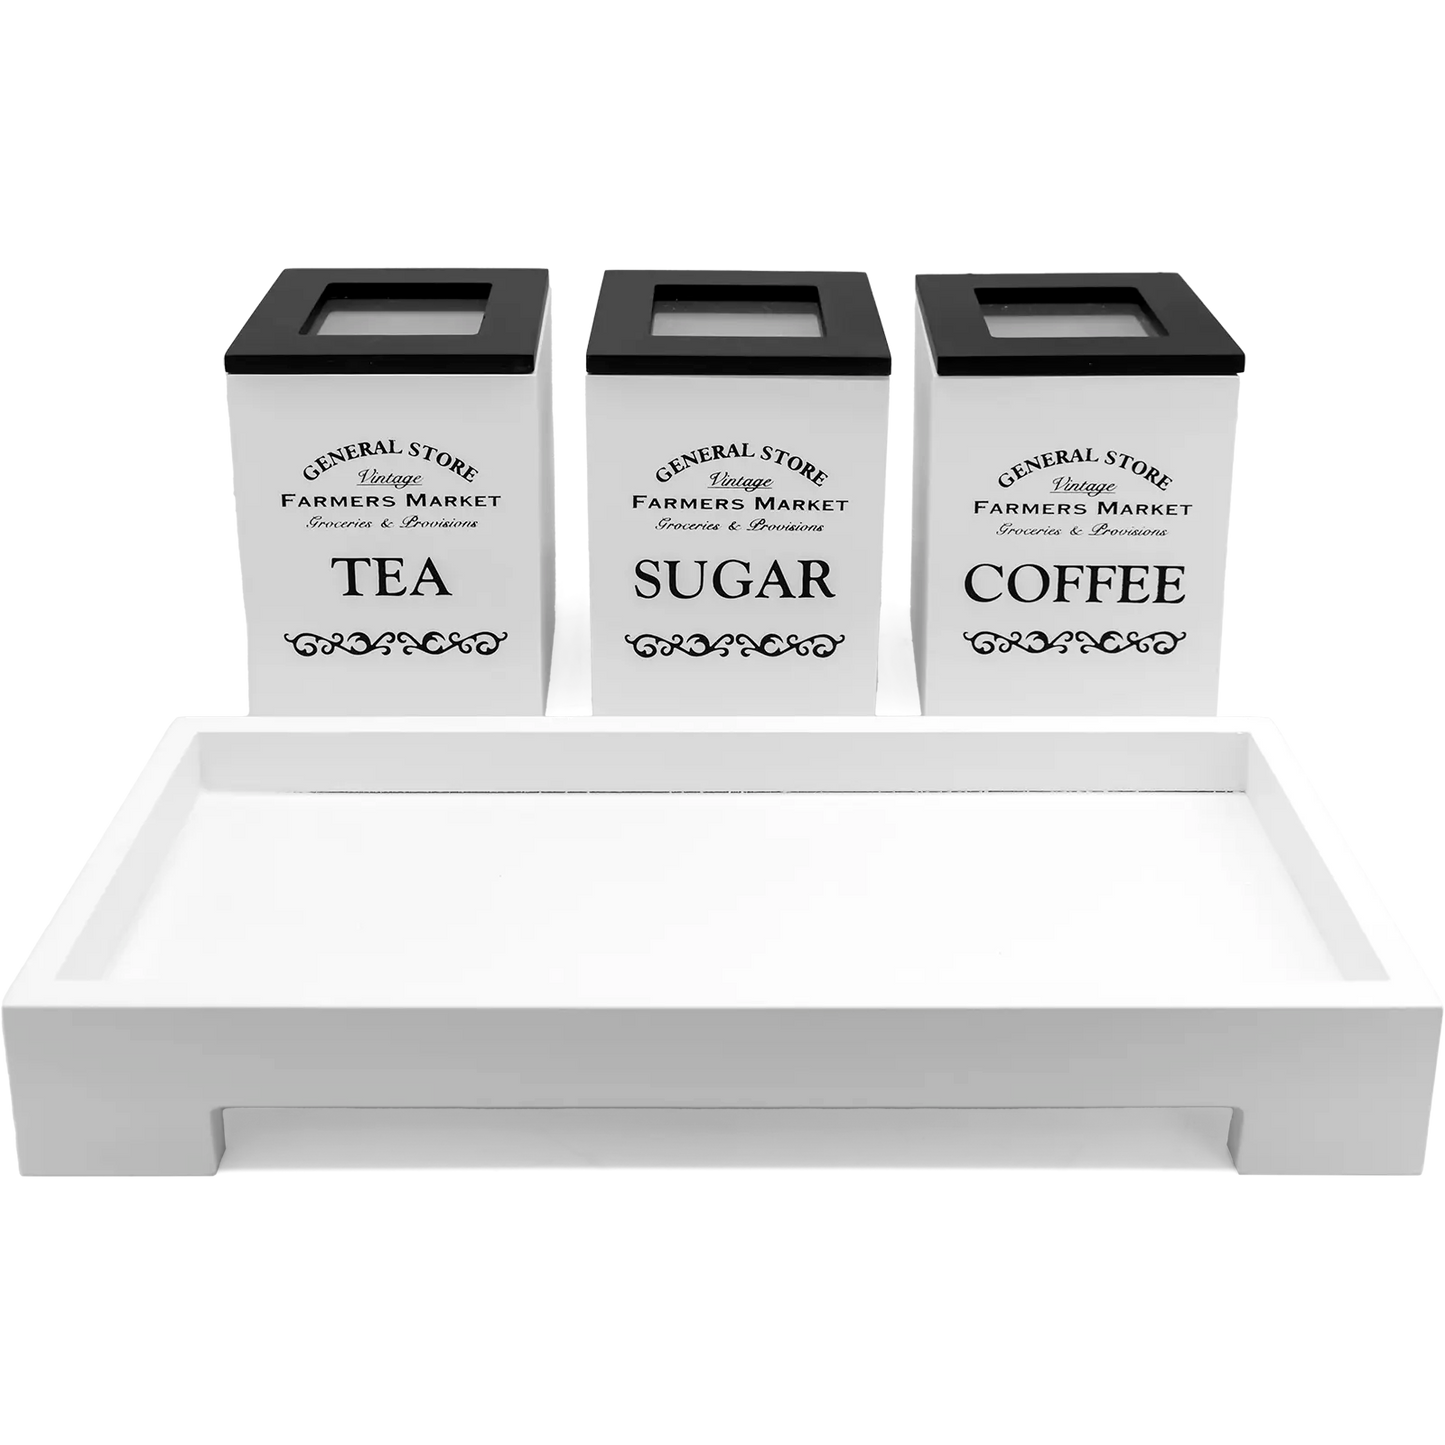 White Tea Coffee Sugar 3 Piece Canisters with Stand